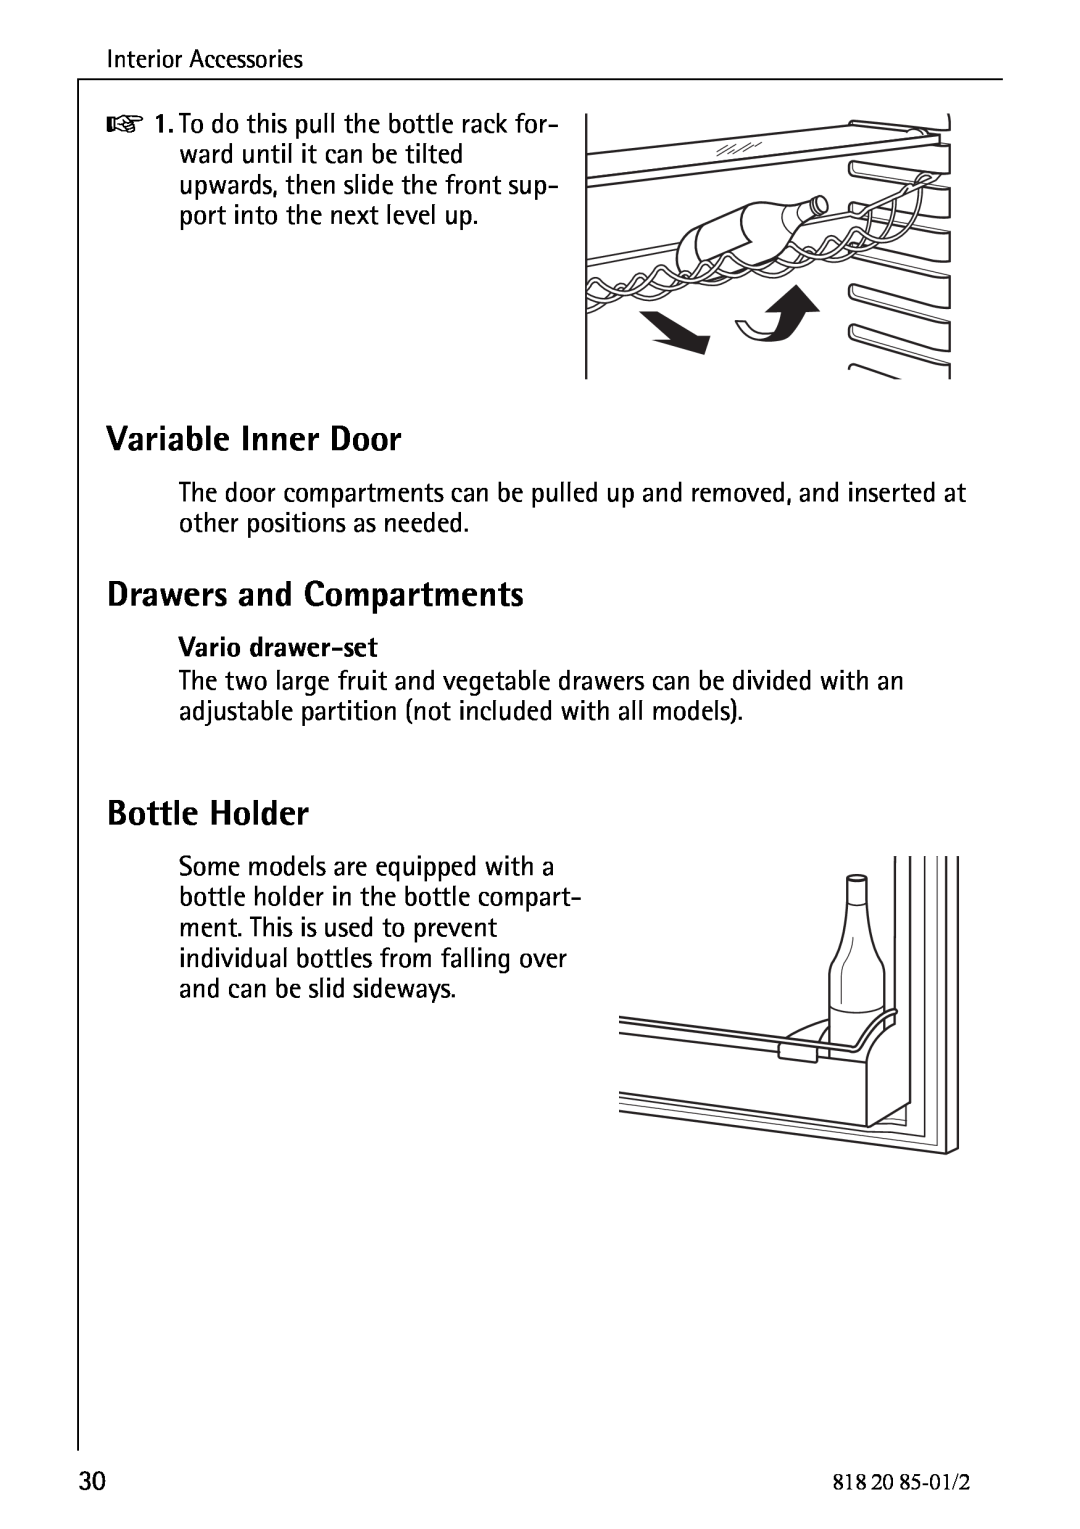 Electrolux 818 20 85 operating instructions Variable Inner Door, Drawers and Compartments, Bottle Holder, Vario drawer-set 